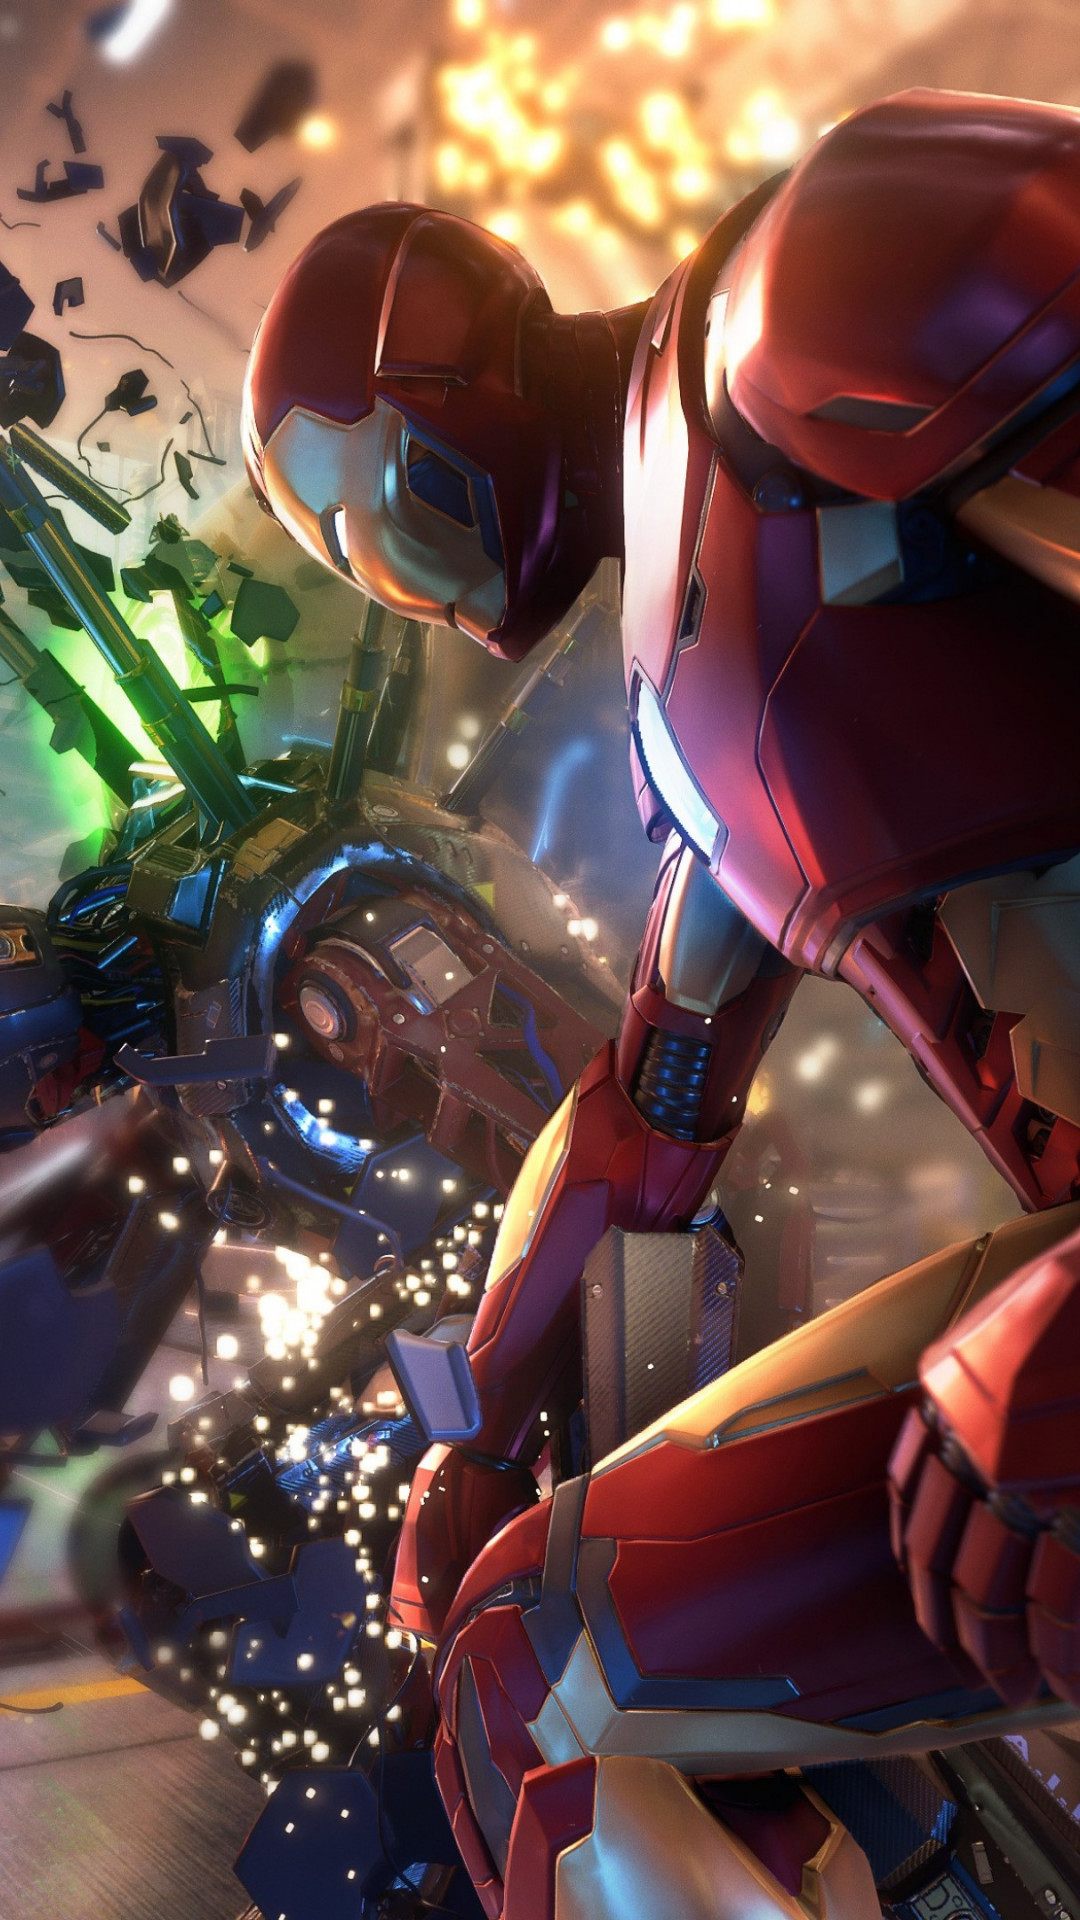 Download wallpaper: Iron Man in Marvel's Avengers video game 1080x1920